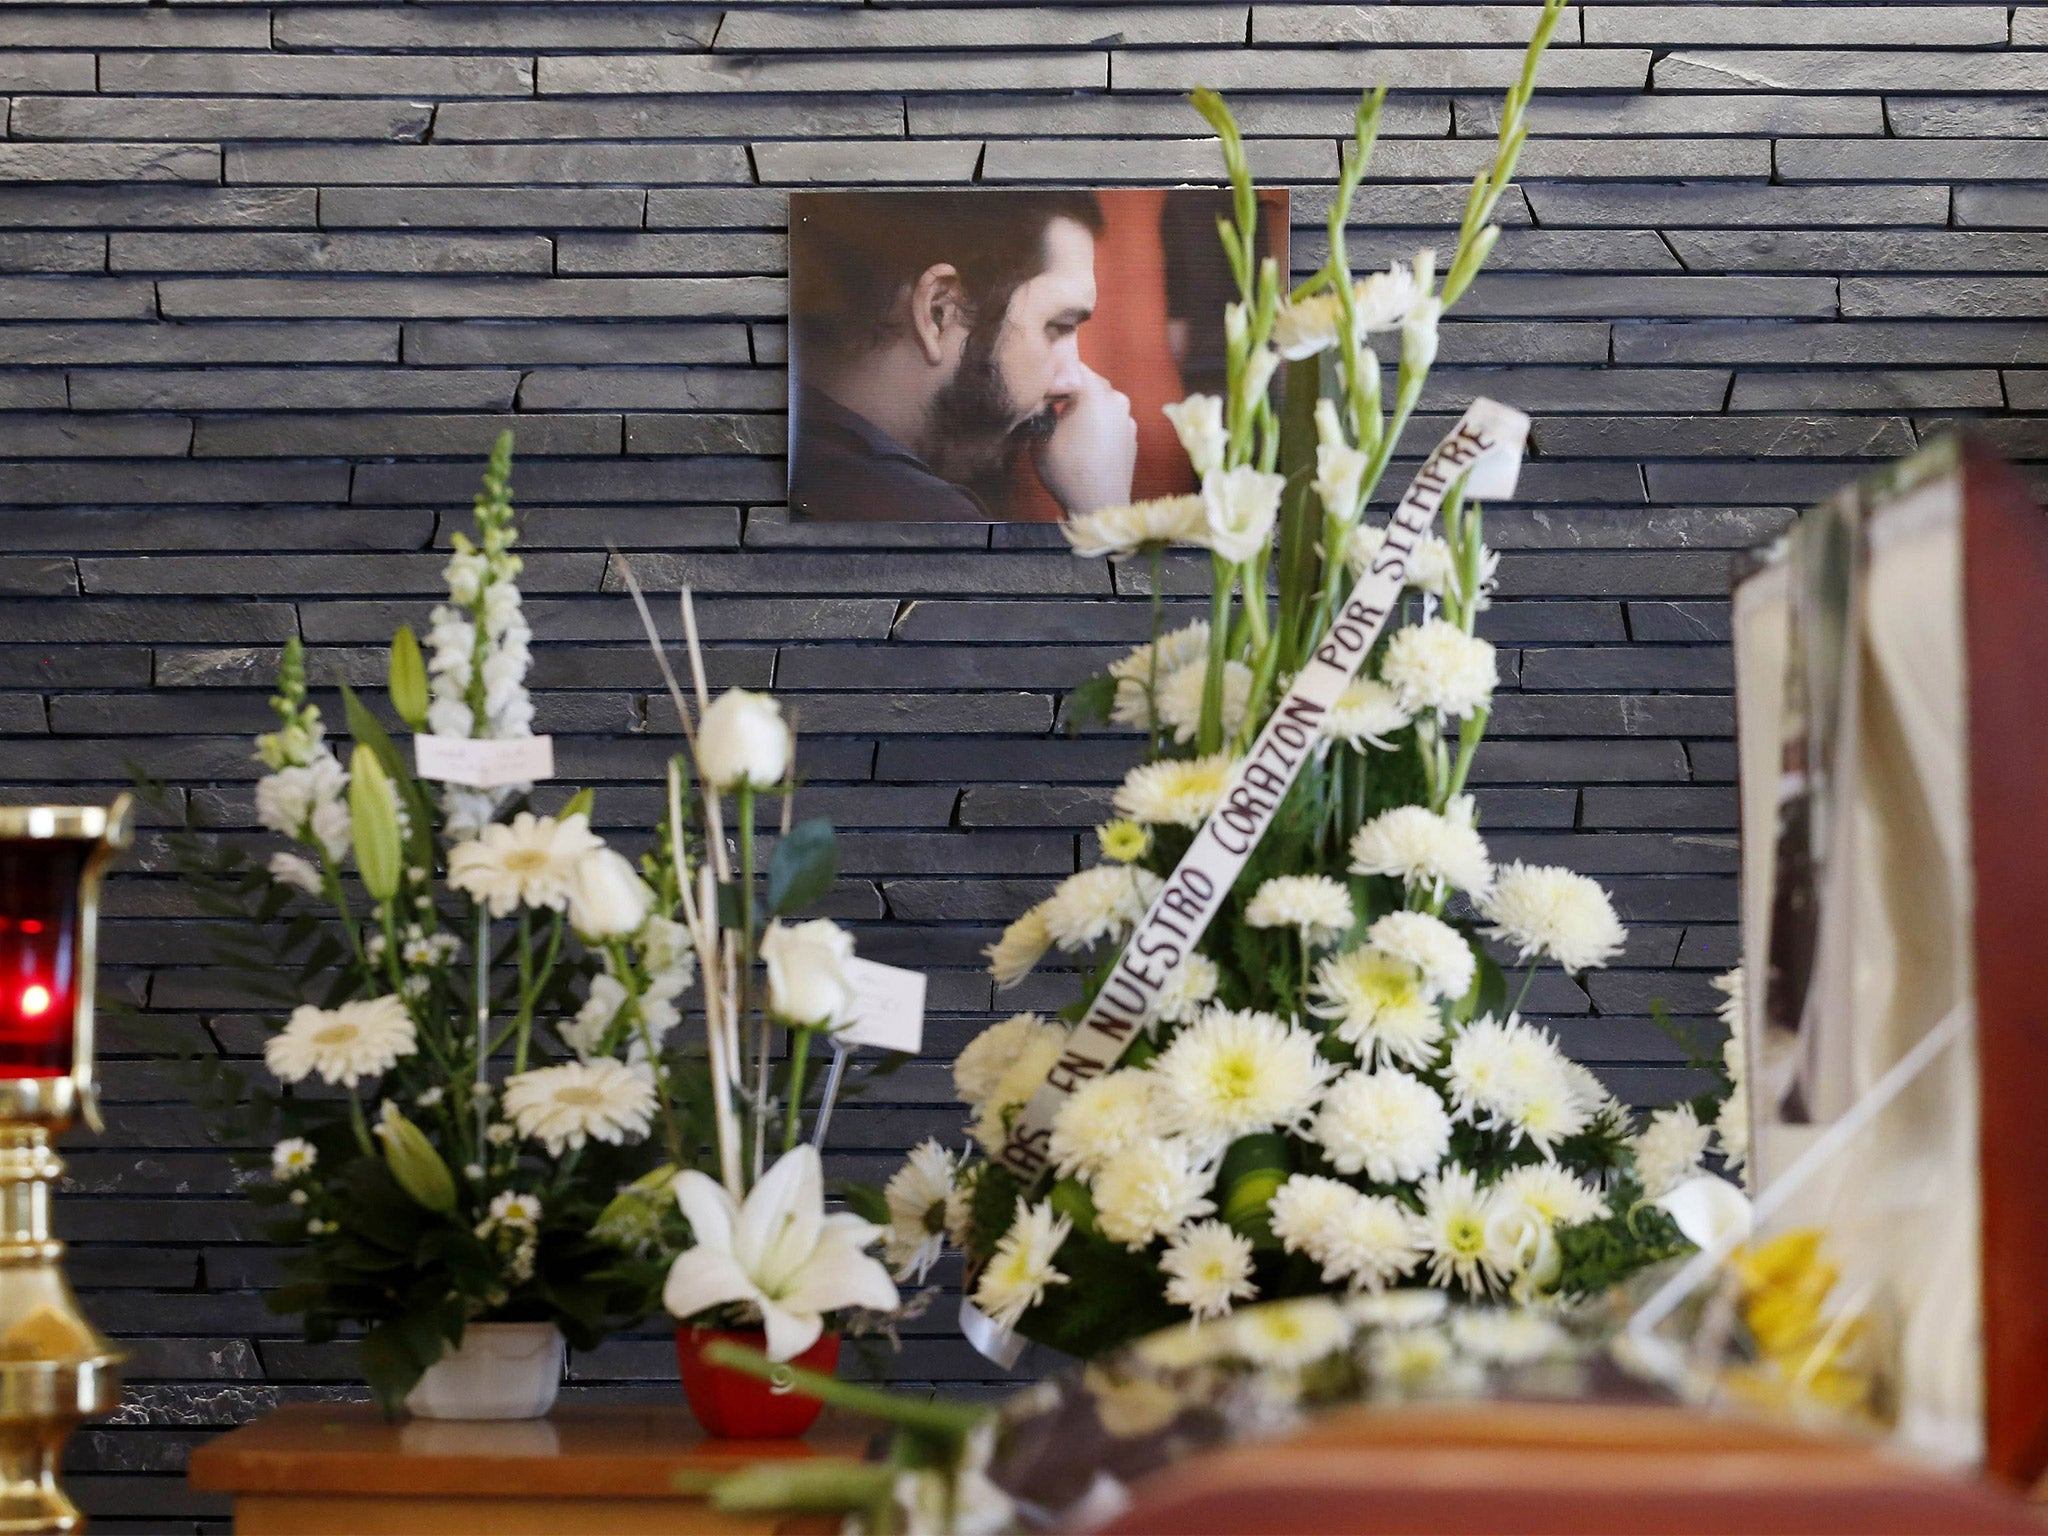 A photo of Canek Sanchez Guevara, the grandson of Cuban revolutionary leader Che Guevara, hangs above his casket during his funeral in Mexico City